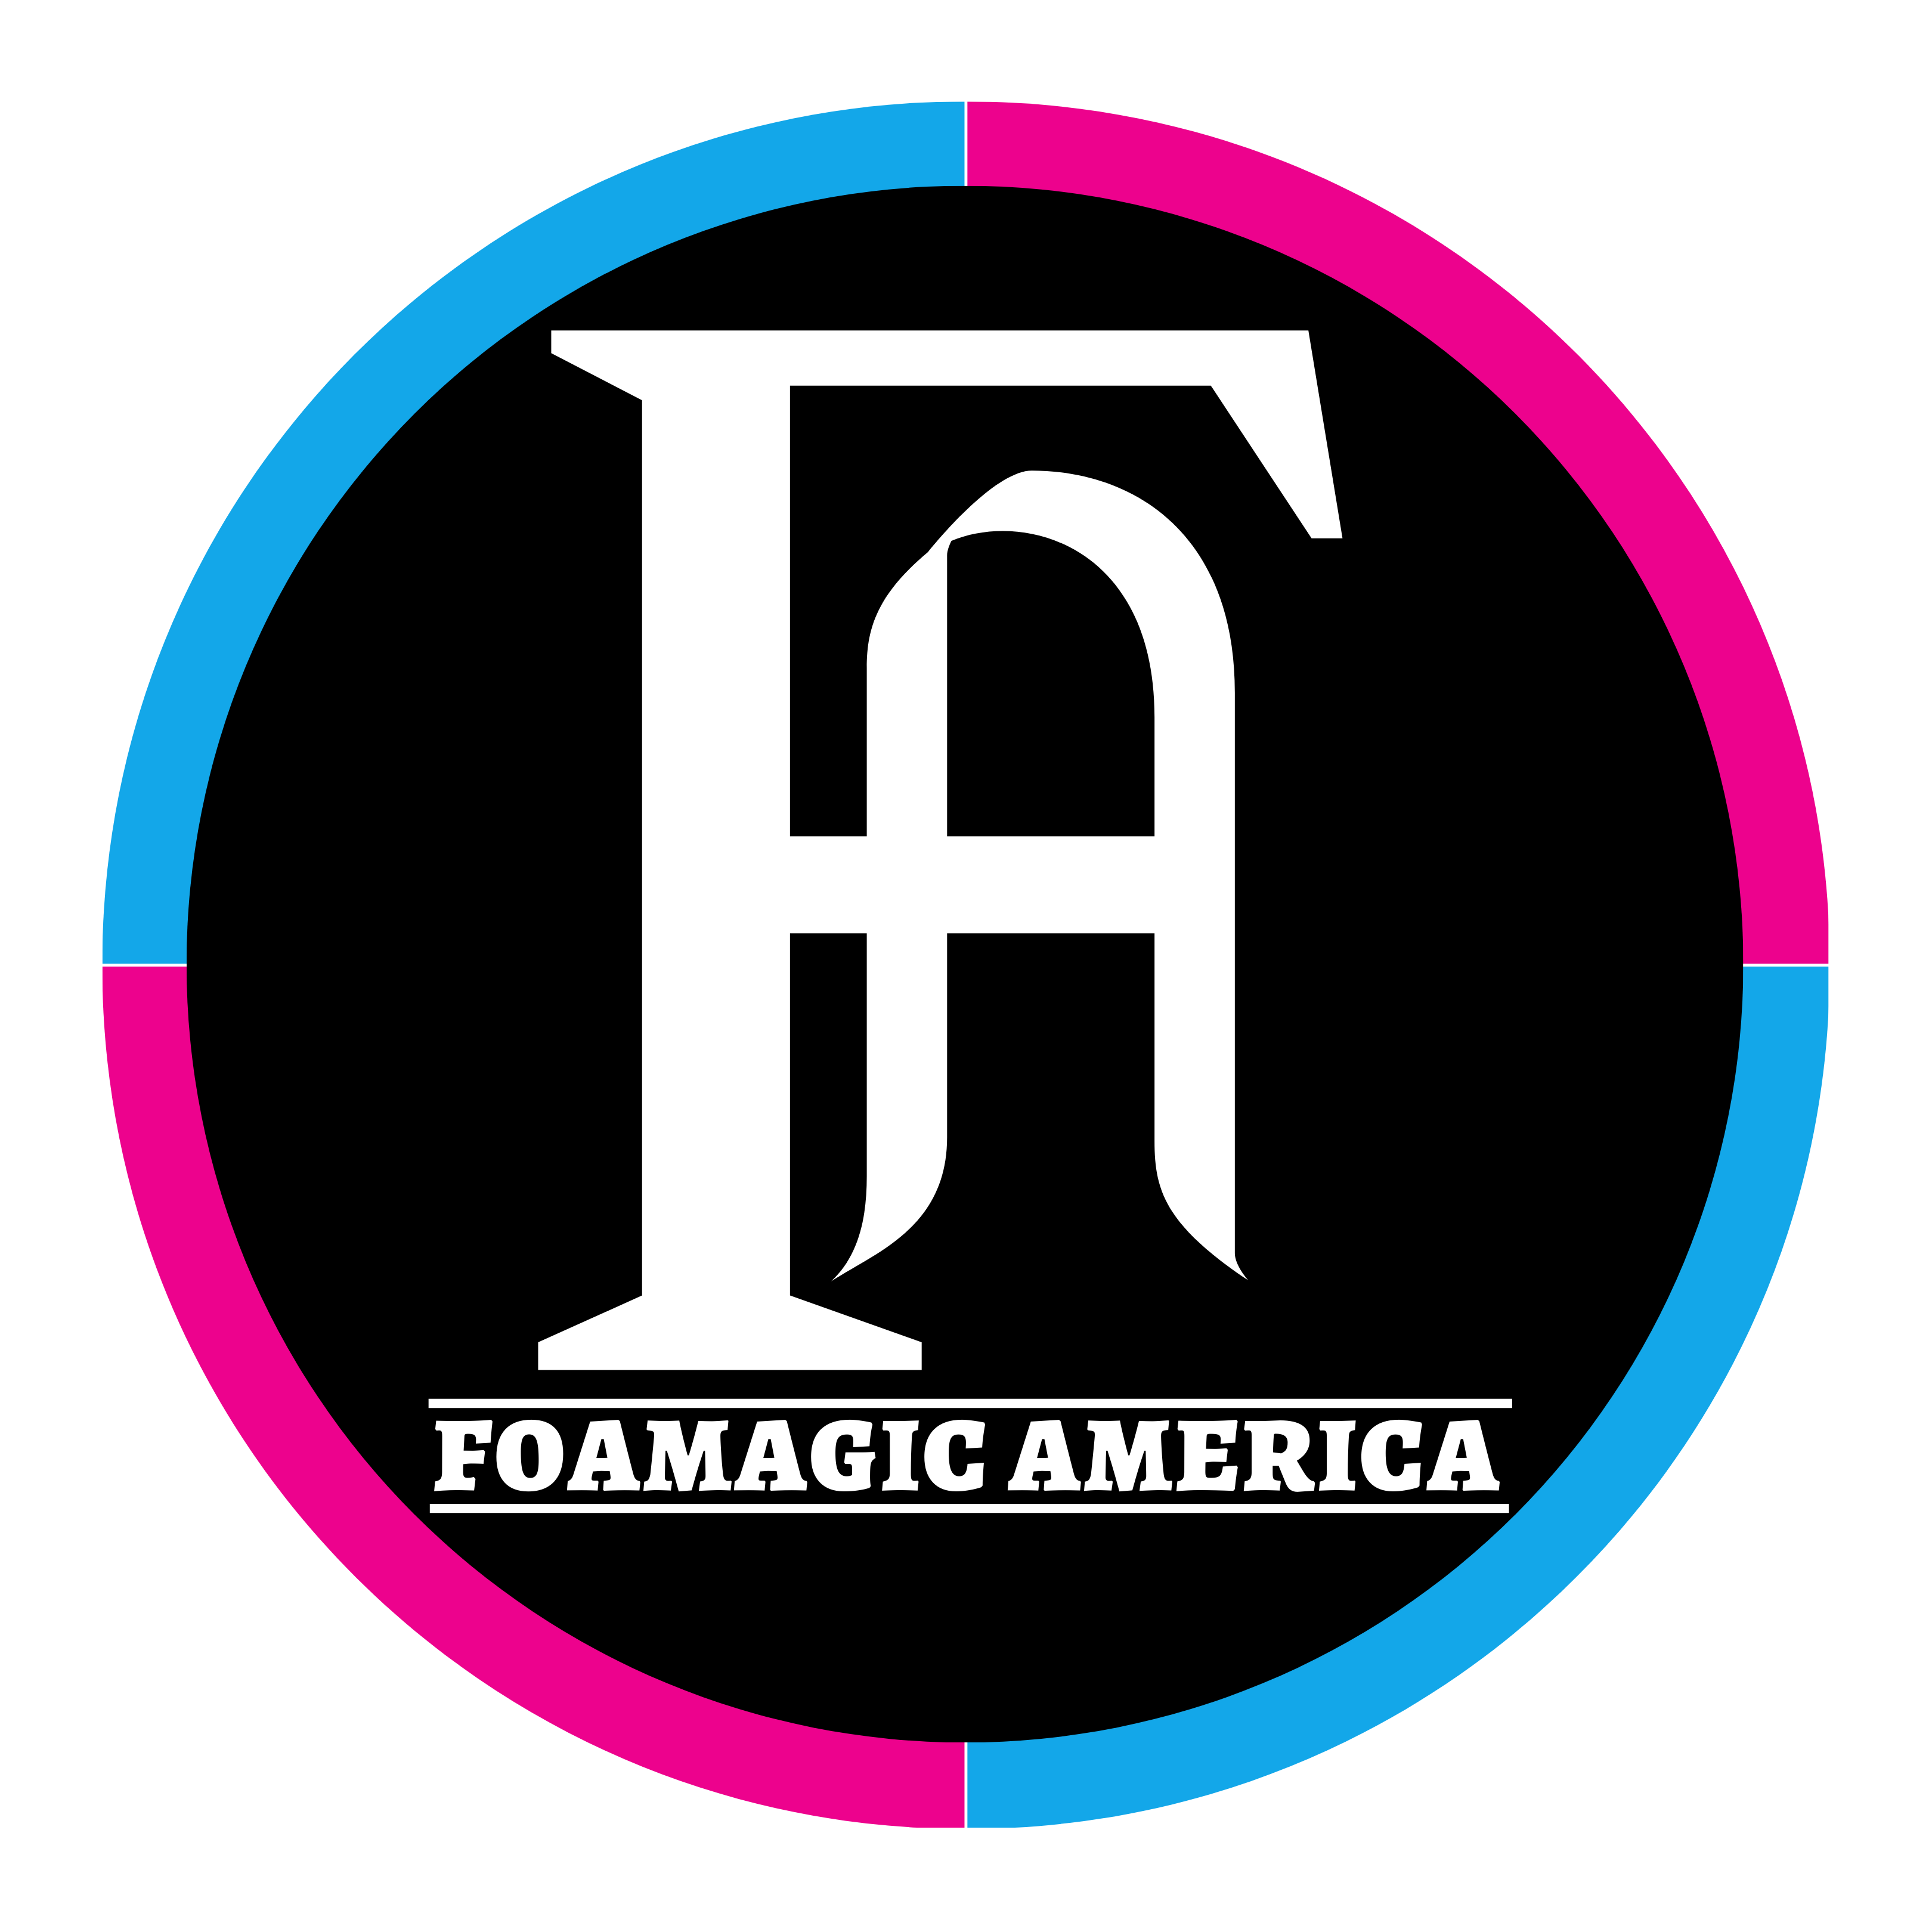 Foamagic America Mobile detailing logo. Mobile cleaners for Home Cleaning or housekeeping, Auto wash and detailing, and business cleaning/janitorial services.